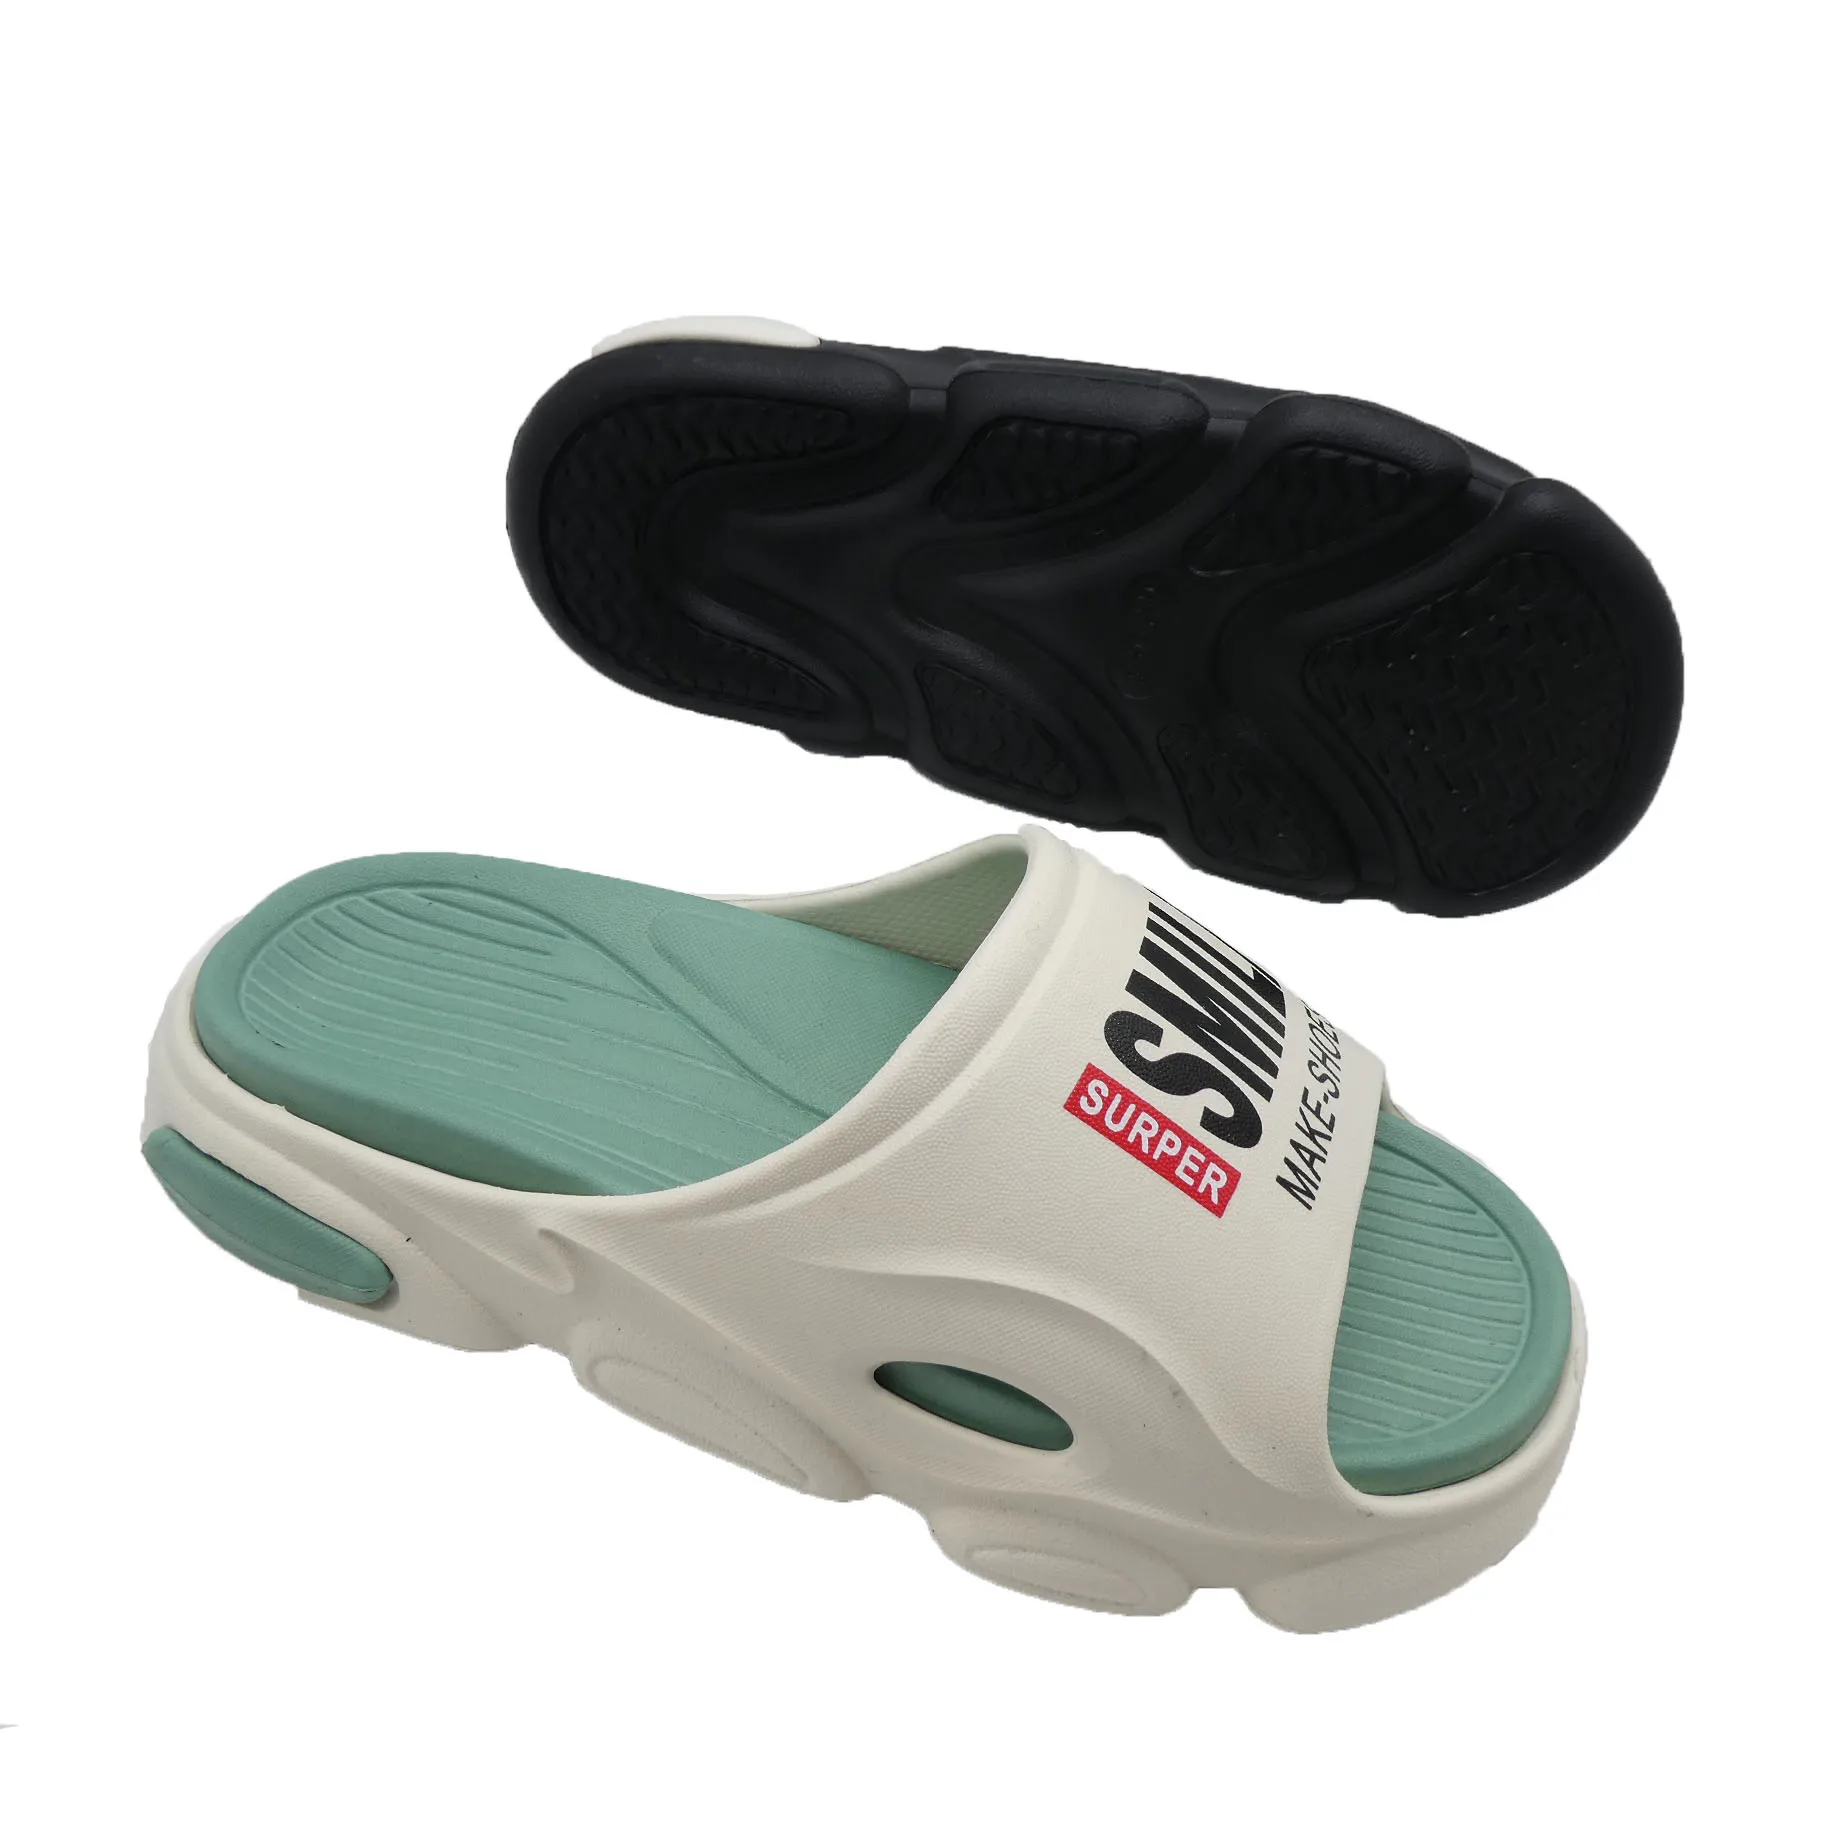 High Quality Comfortable Anti-Slip Thick Sole EVA outdoor indoor slippers Sandal Slides Slippers